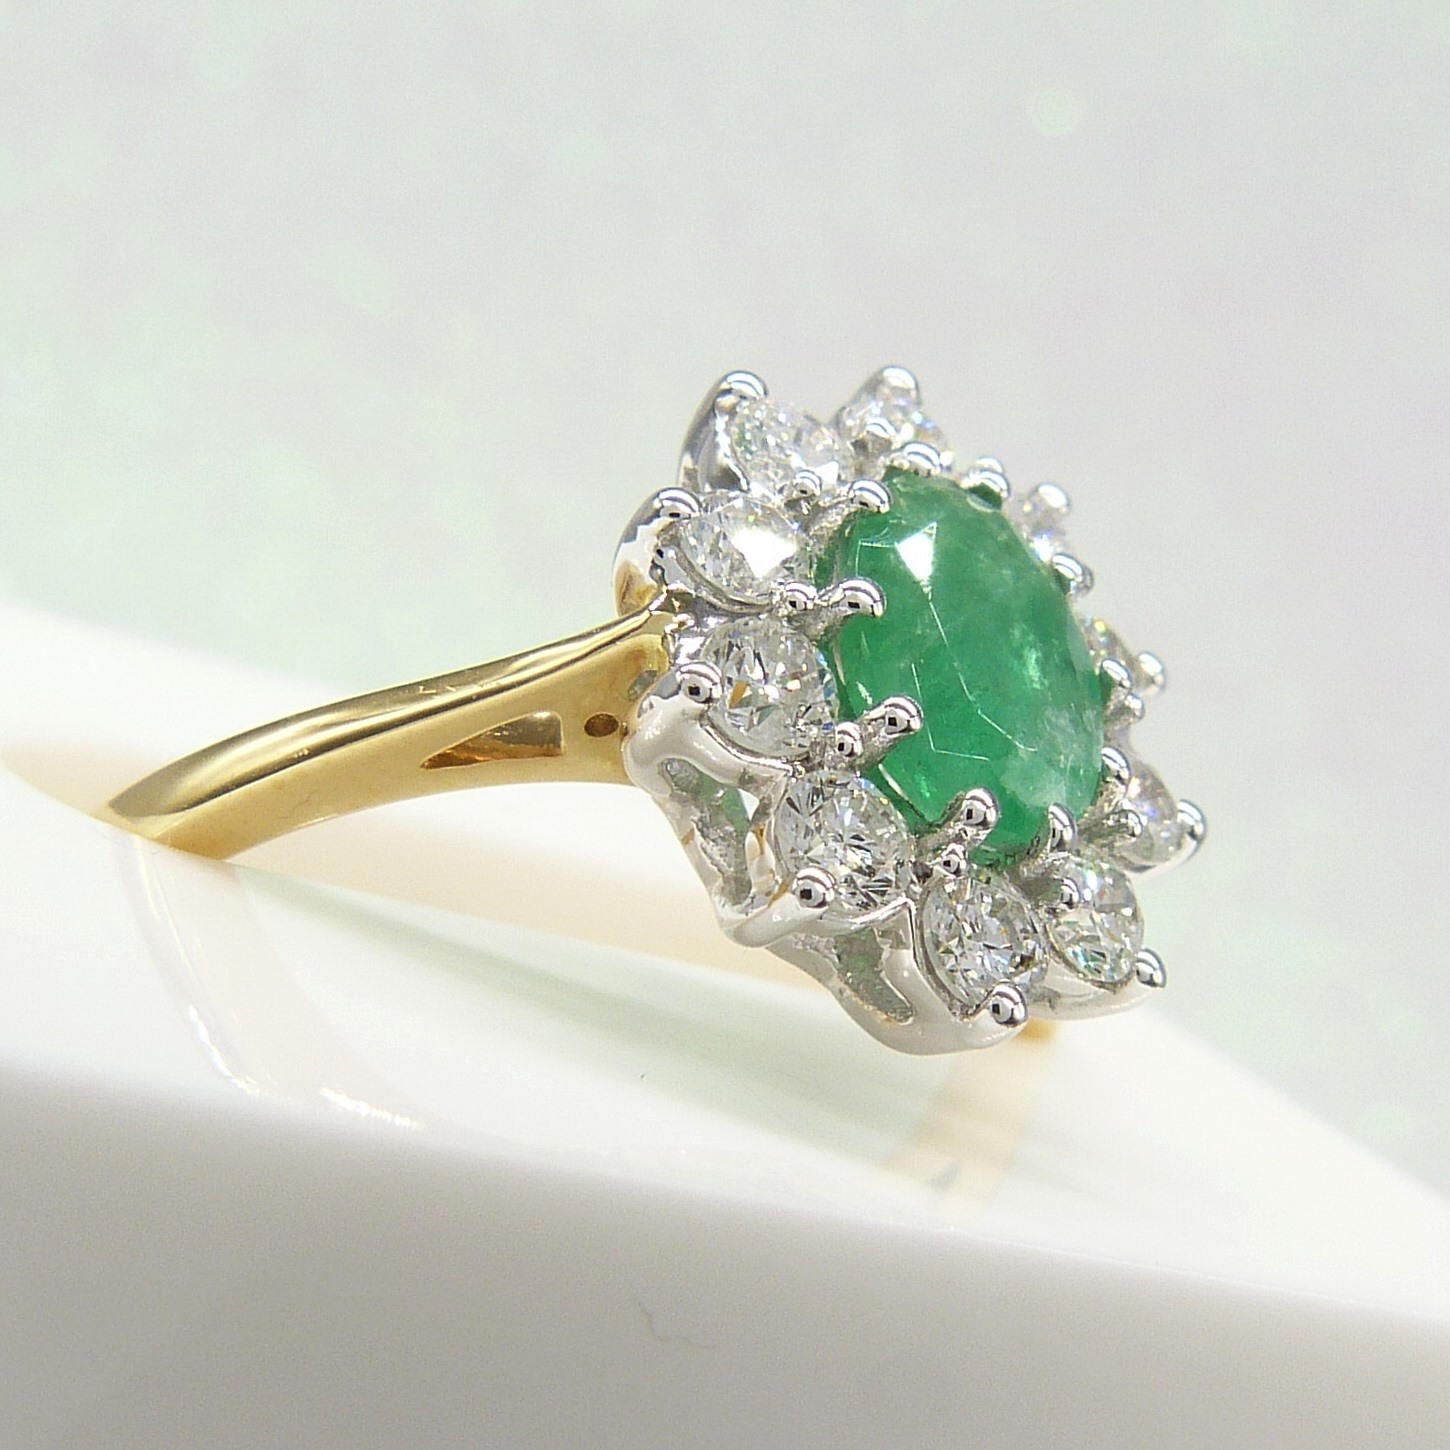 A certificated 18ct yellow Gold oval Emerald gemstone and round brilliant-cut Diamond ring - Image 10 of 10